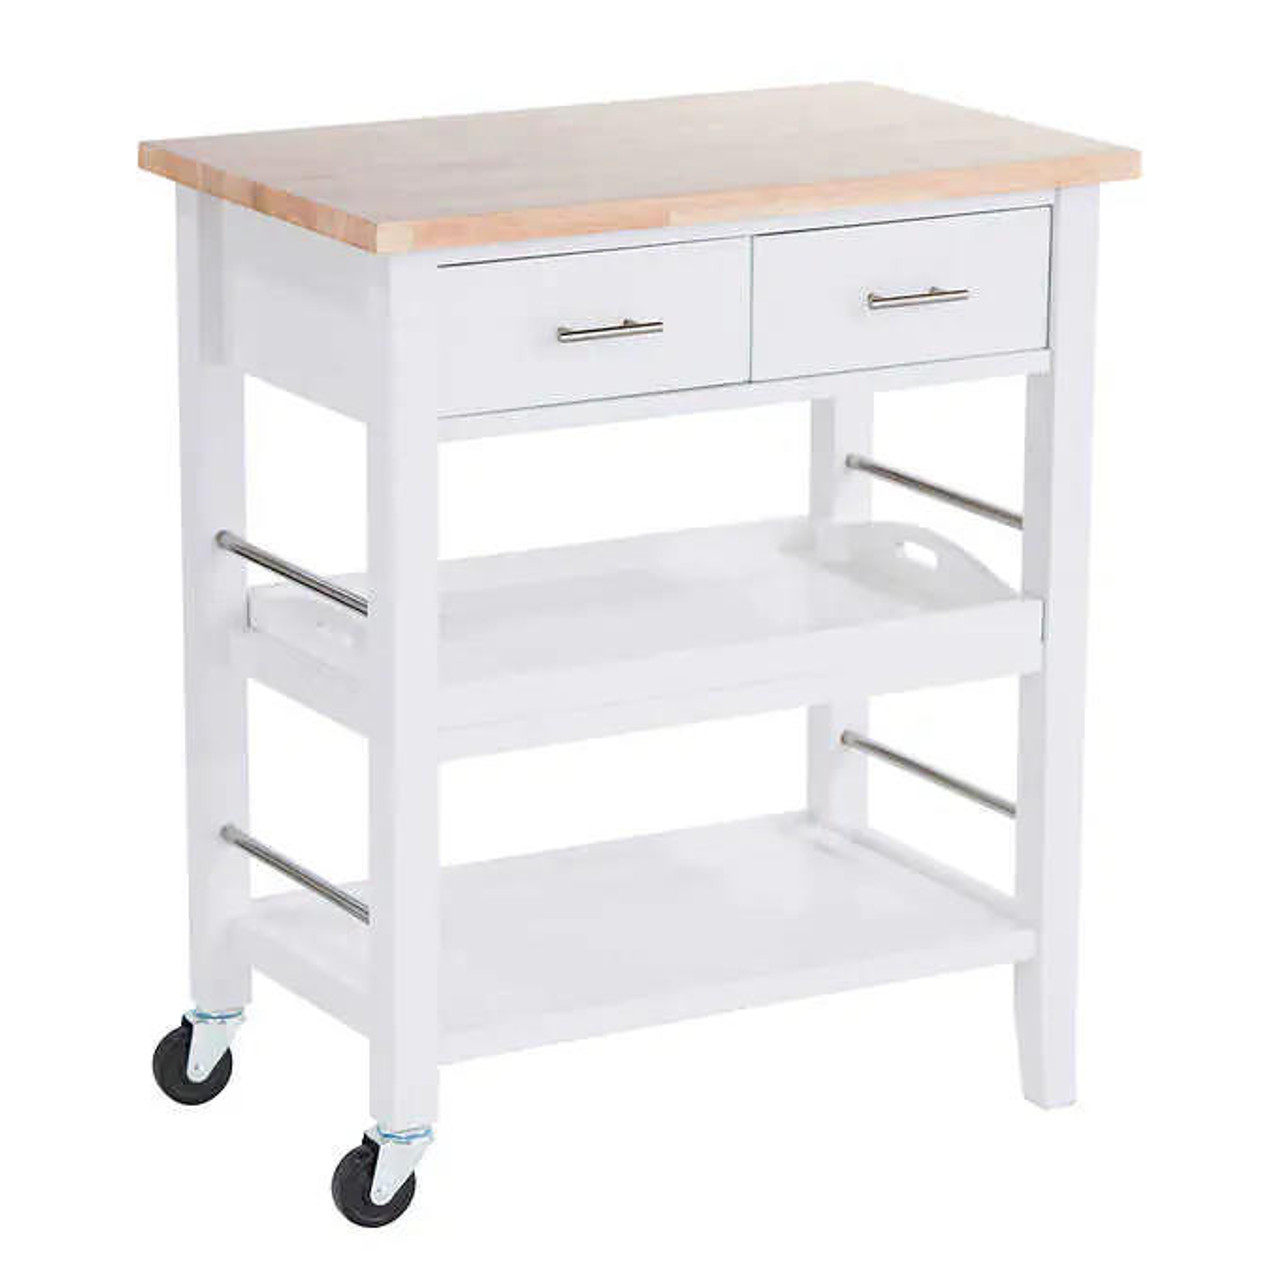 TRINITY White 3-Tier Wood Kitchen Cart with Drawers - A Functional and Stylish Culinary Companion- Chicken Pieces